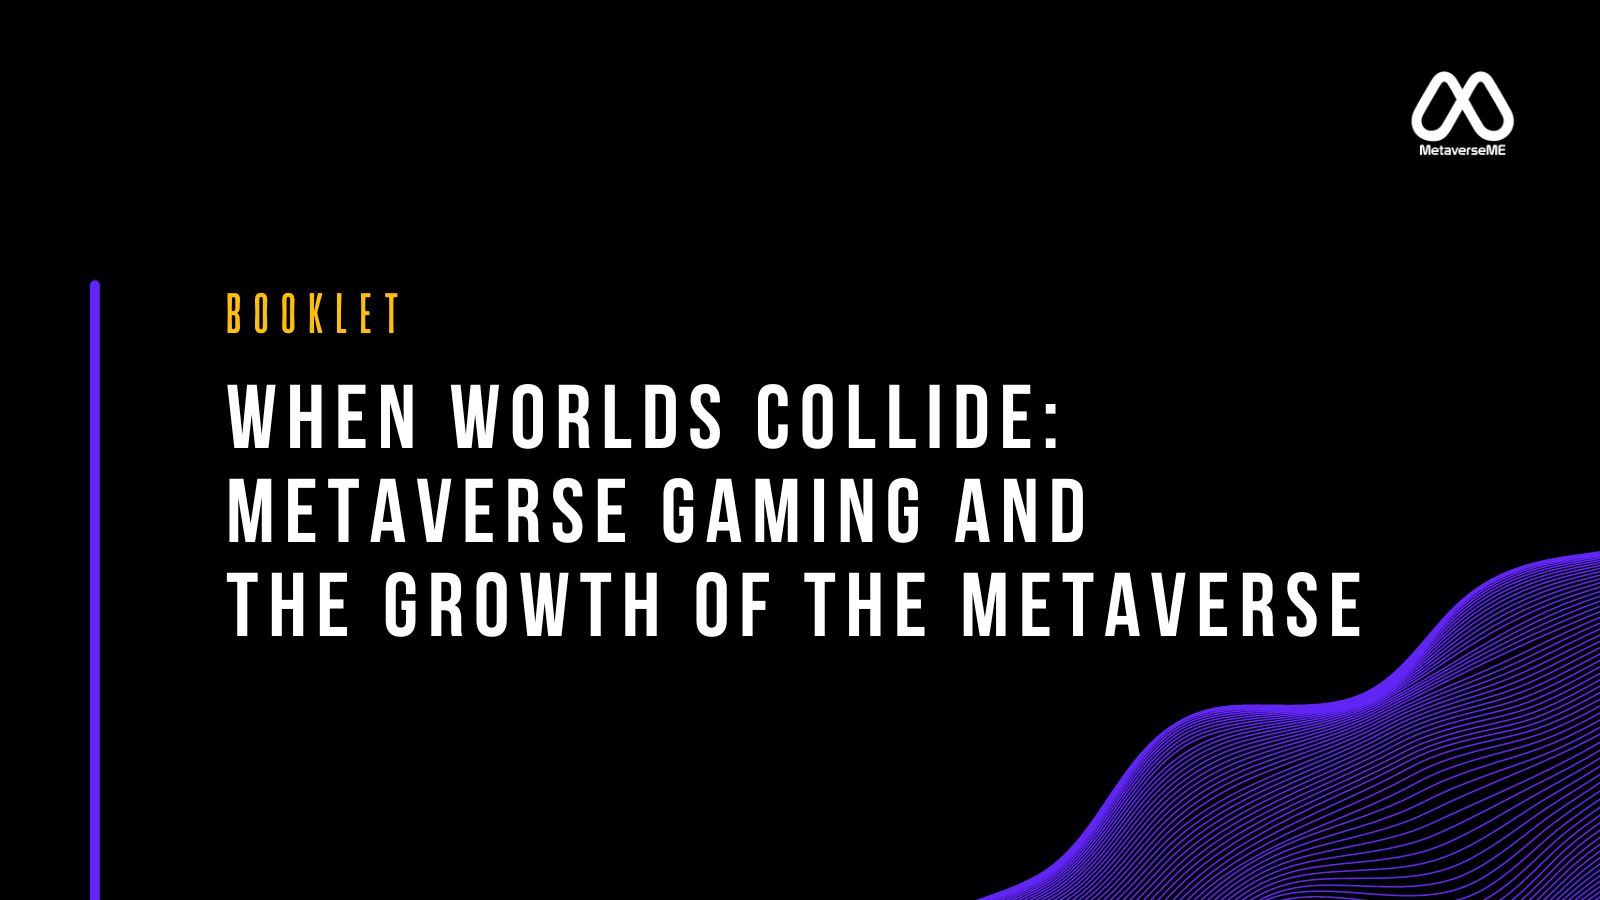 When Worlds Collide: Metaverse Gaming and the Growth of the Metaverse - Image